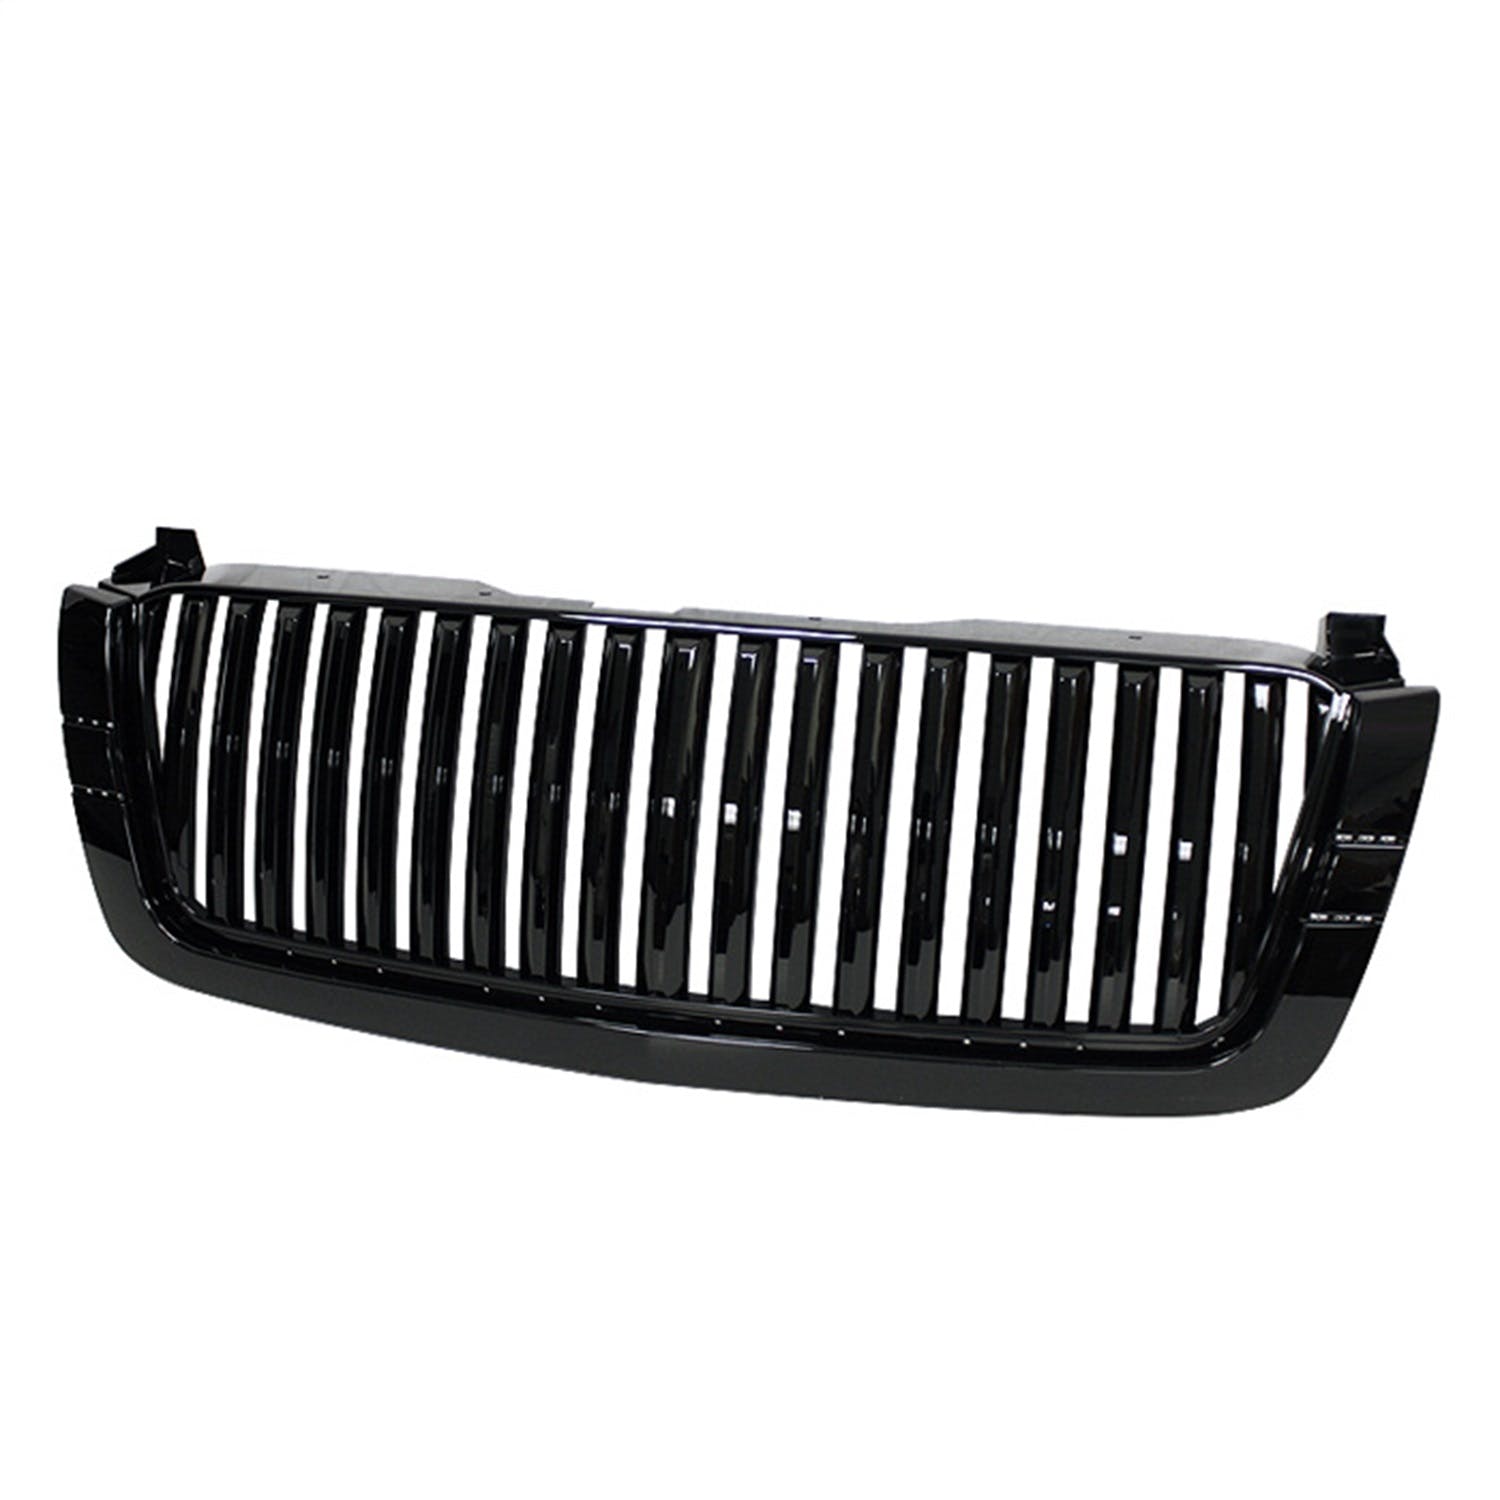 XTUNE POWER 5017093 Chevy Silverado 03 06 Center Only ( Require HD YD CS03 1PC Headlight ) Front Grille Black